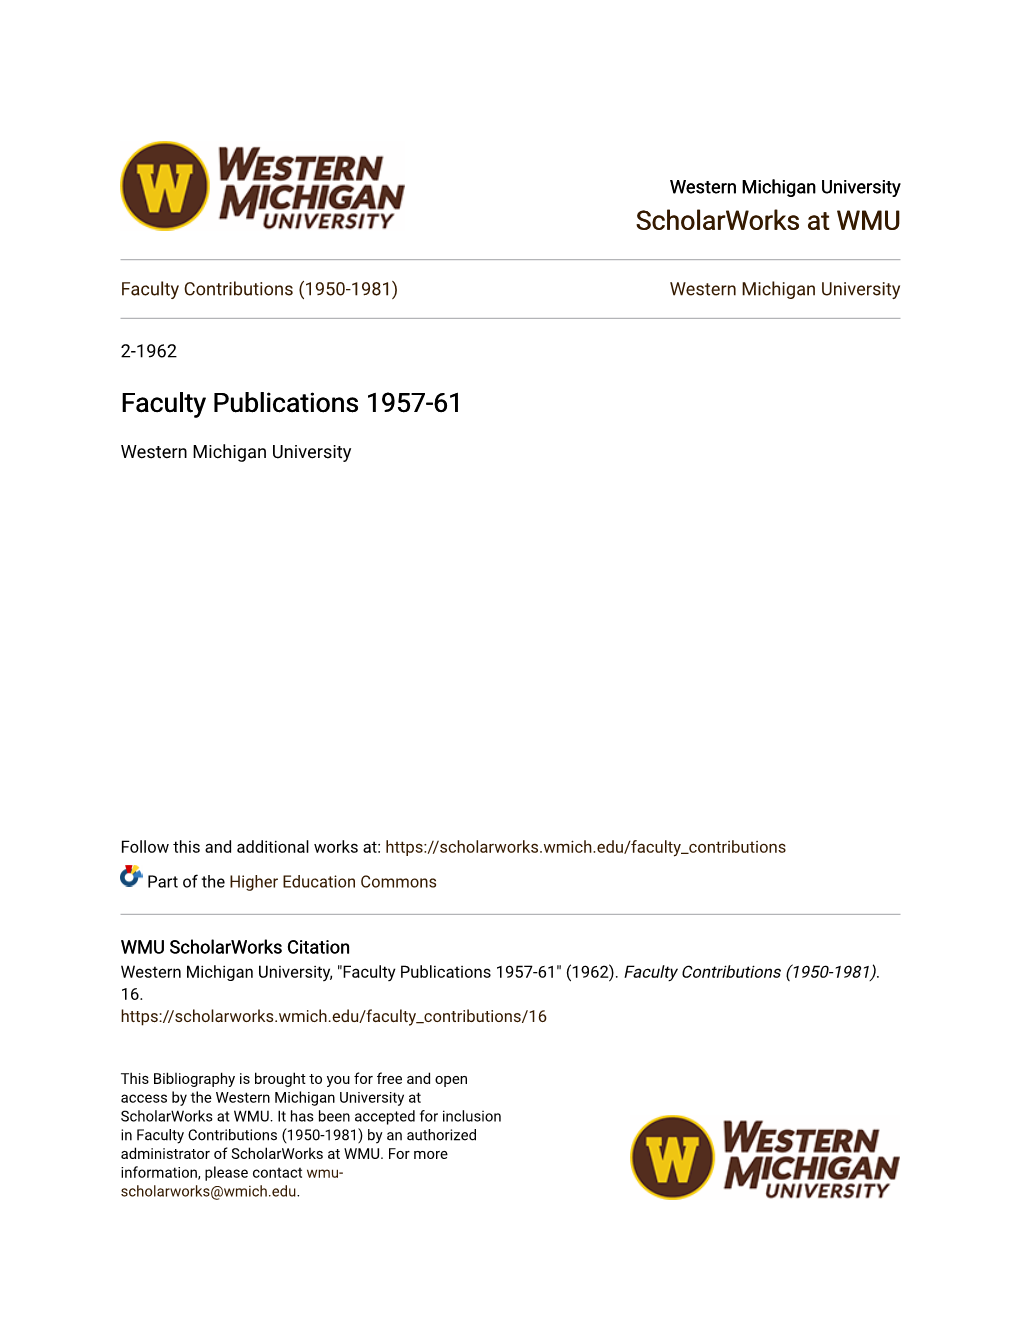 Faculty Publications 1957-61